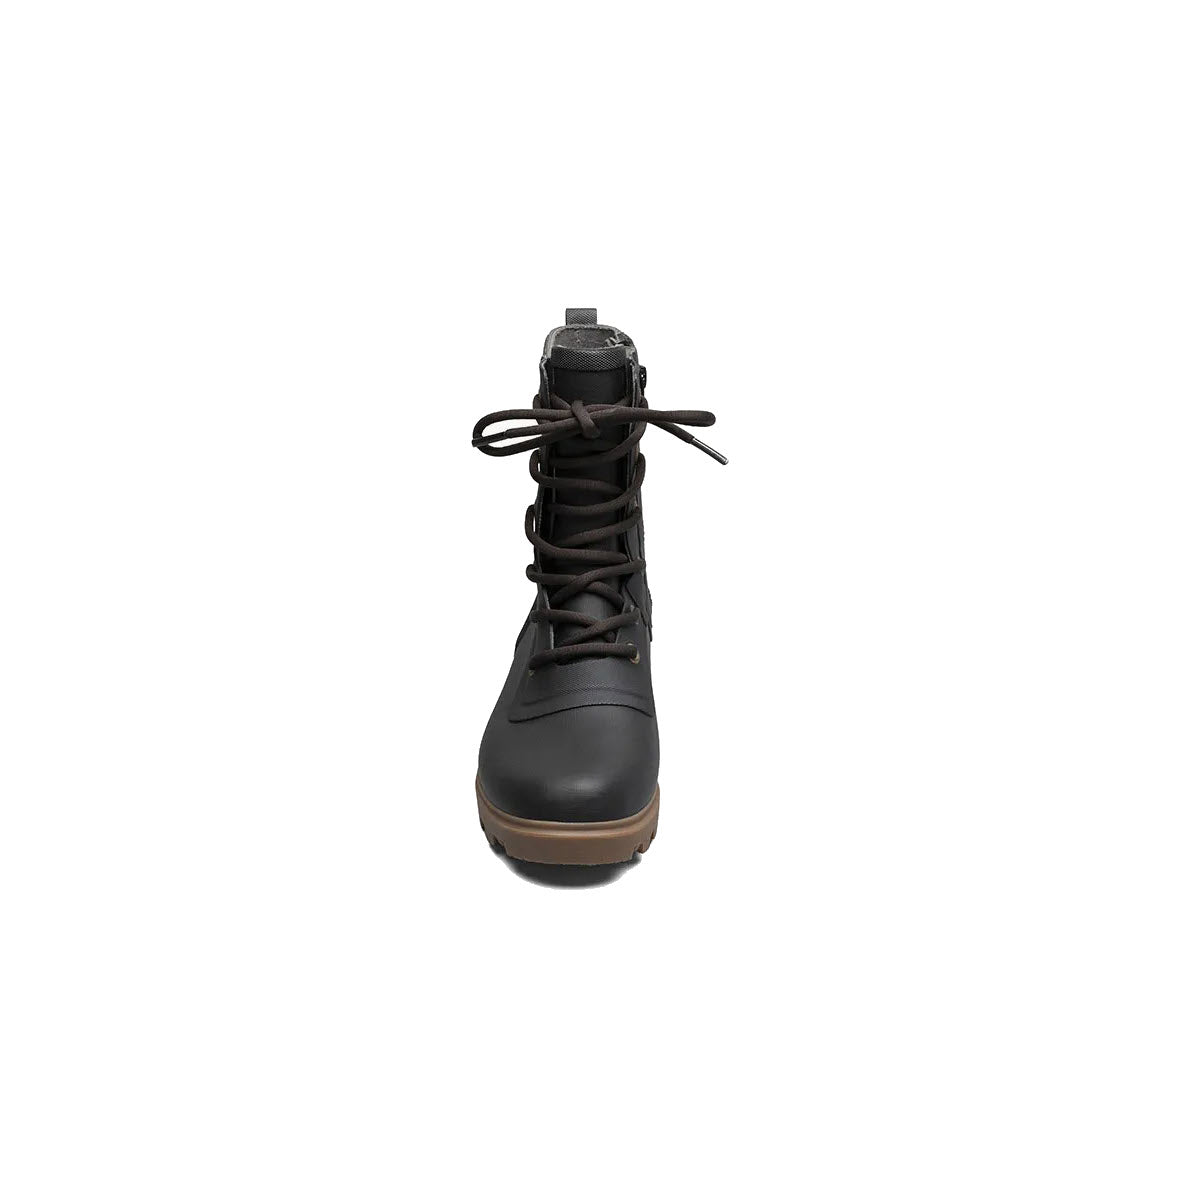 Black lace-up combat boot with a sturdy sole and Bogs Rebound Cushioning, viewed from the front on a white background.